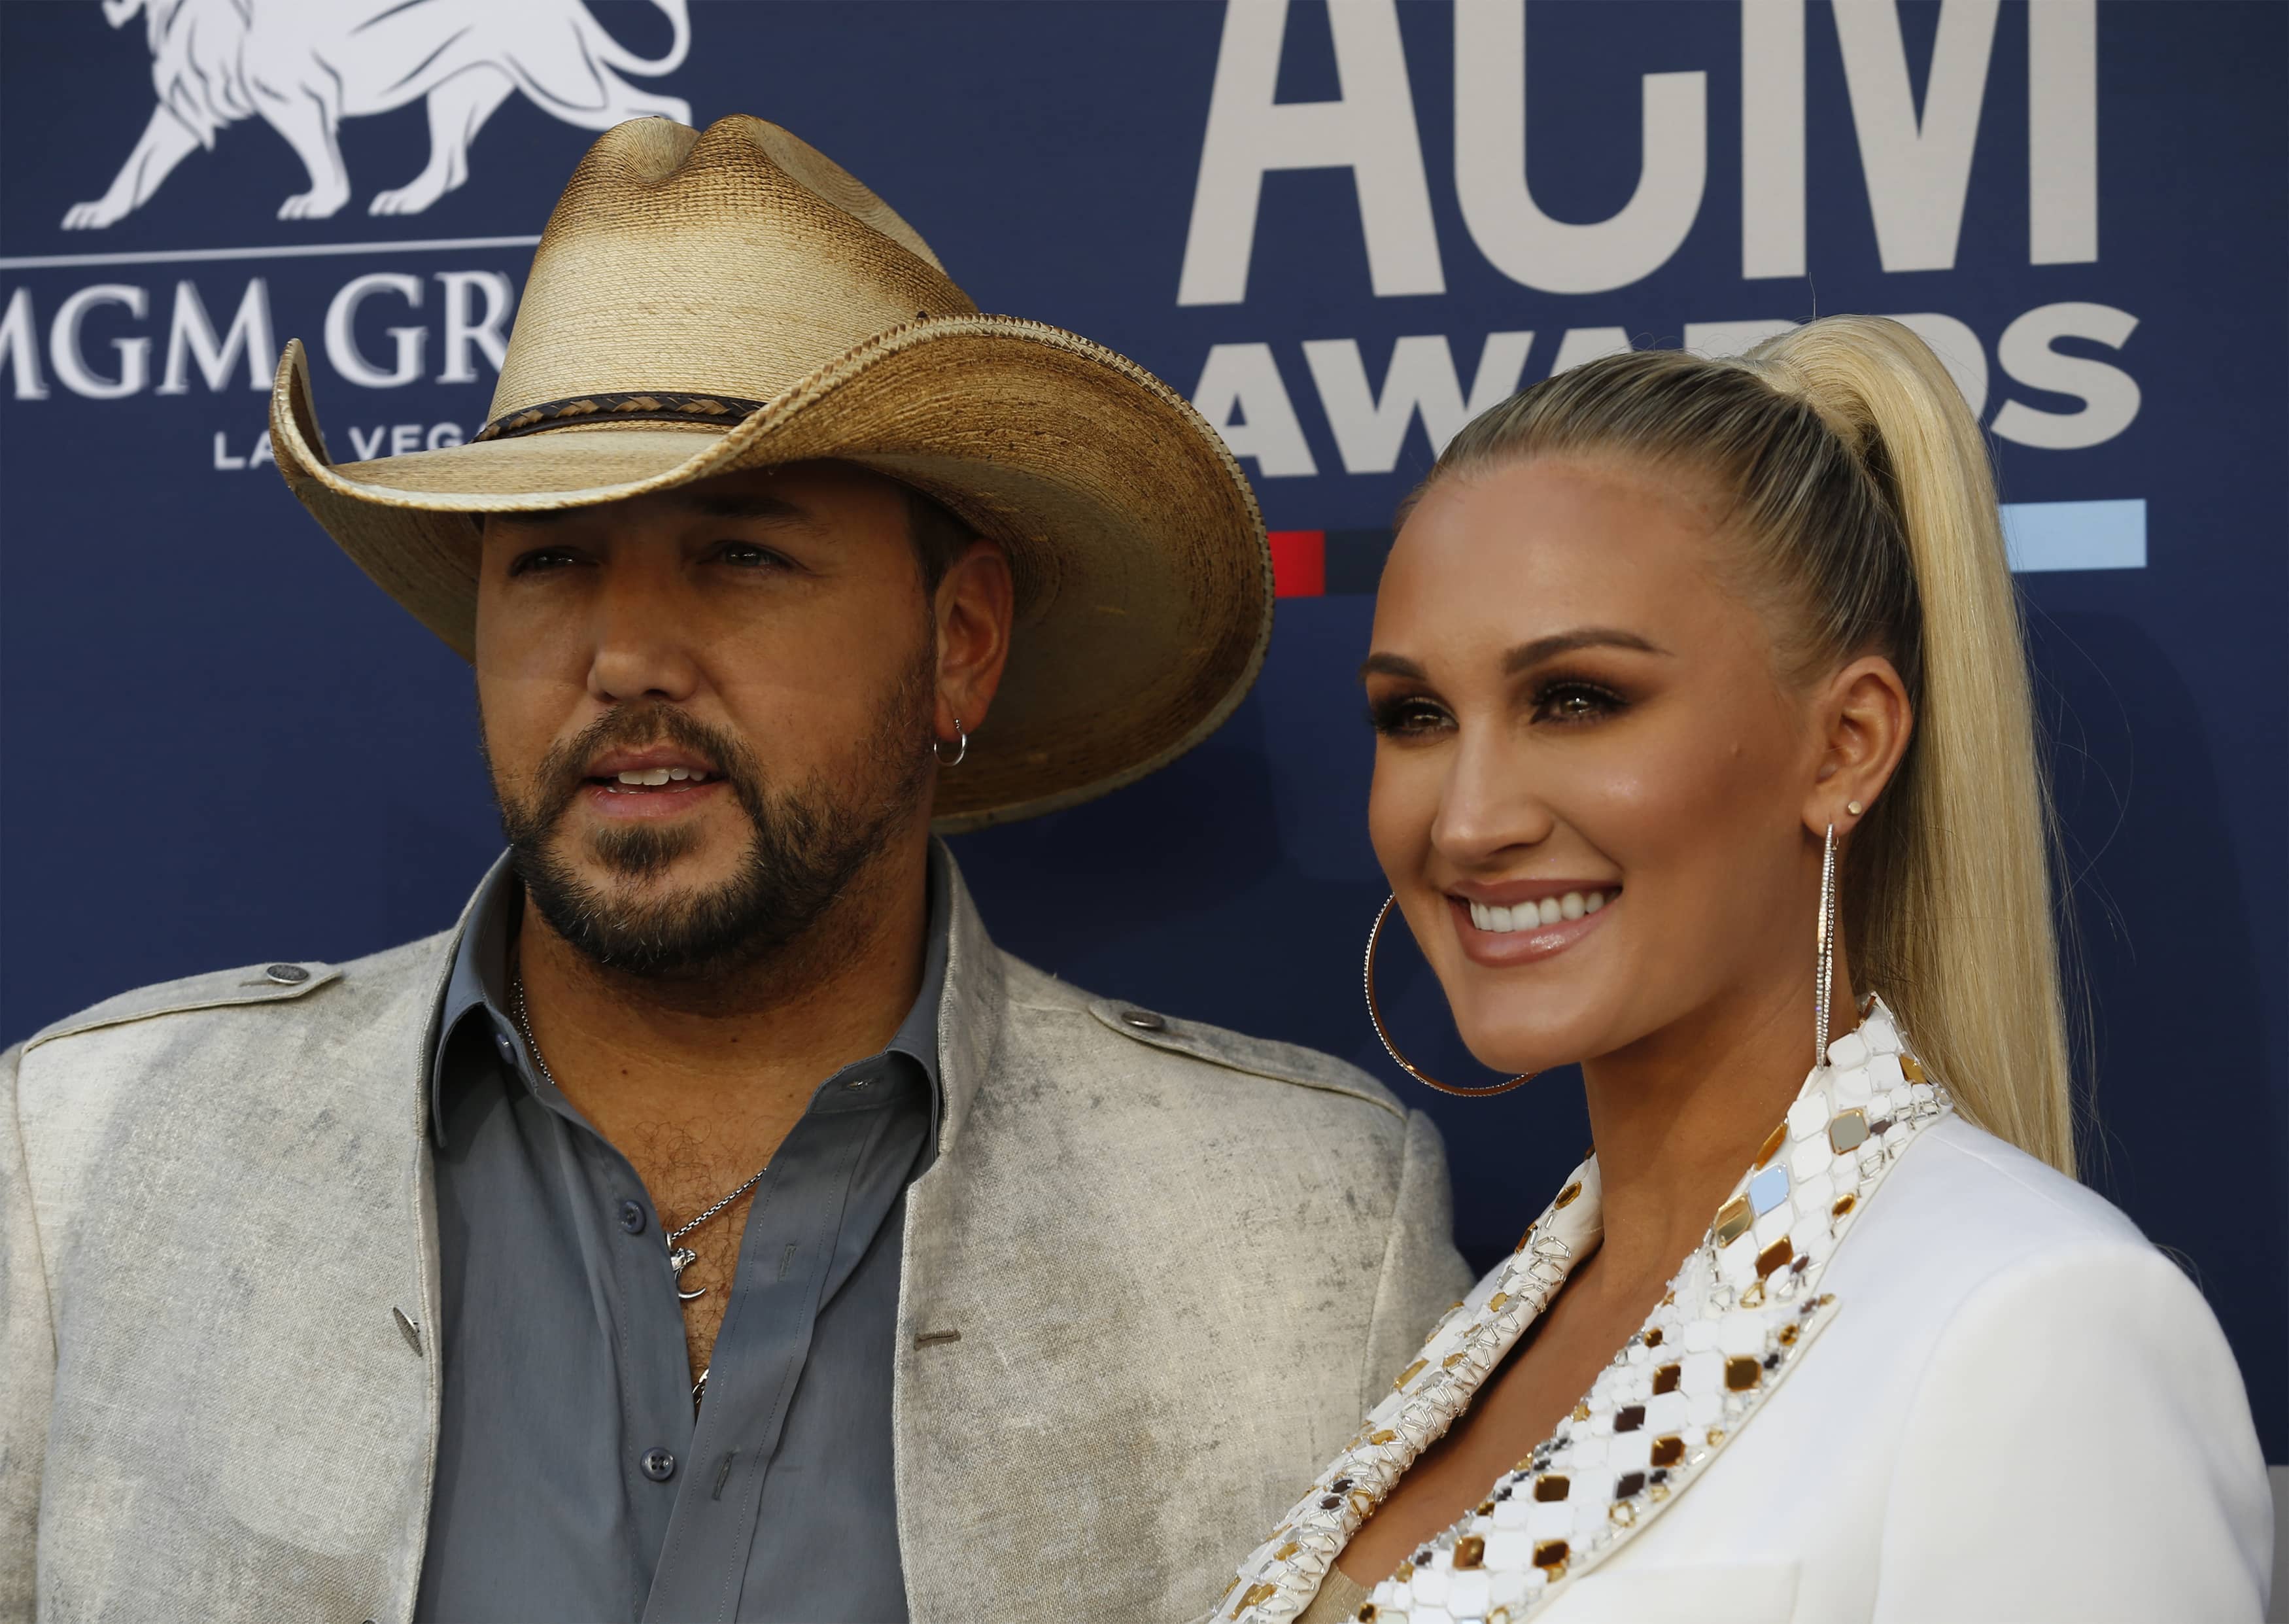 54th-academy-of-country-music-awards-arrivals-las-vegas-nevada-u-s-april-7-2019-jason-aldean-and-brittany-kerr